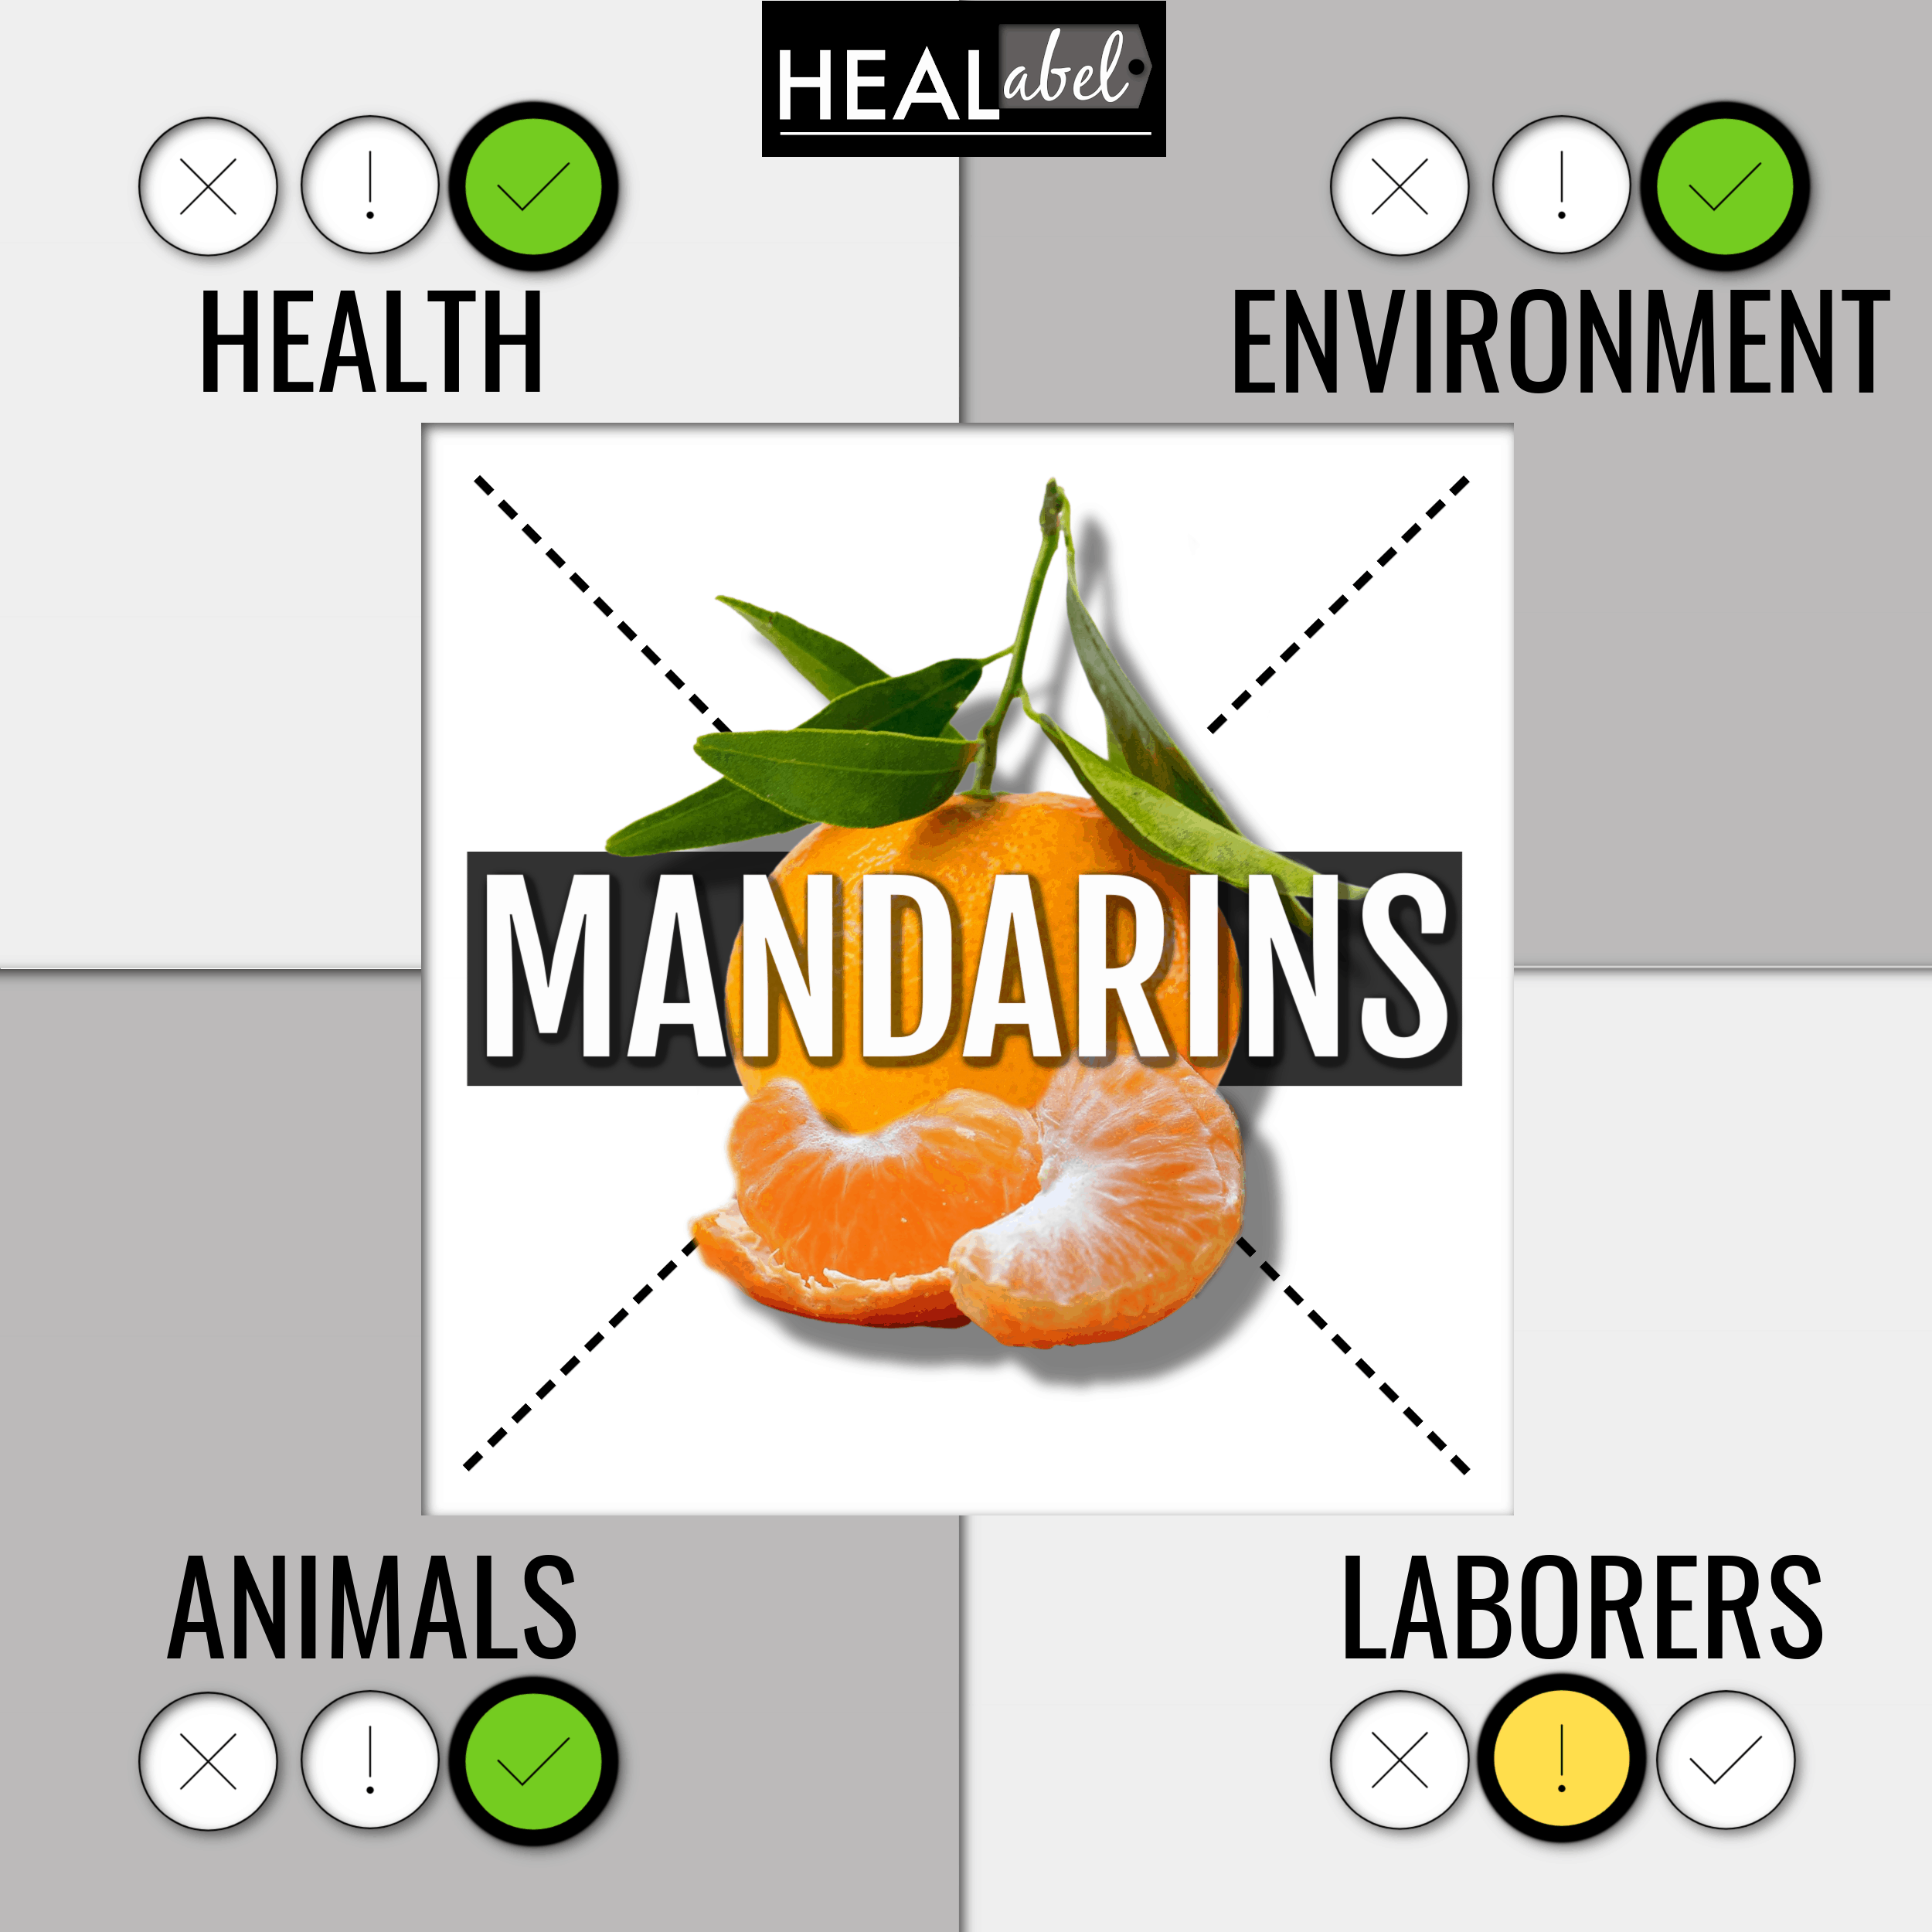 What are mandarins good for